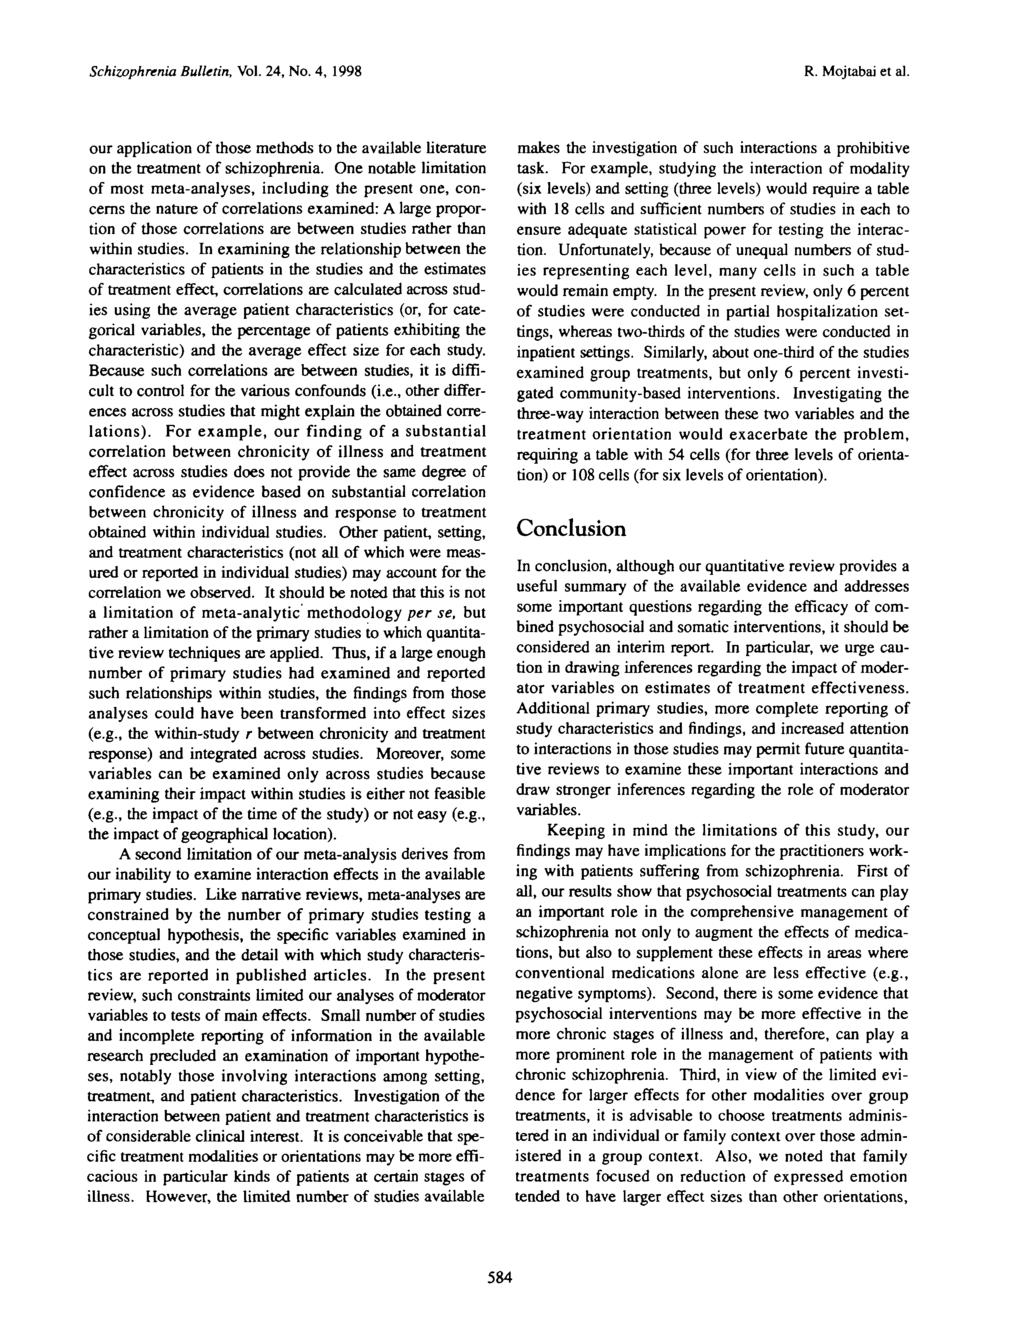 Schizophrenia Bulletin, Vol. 24, No. 4, 1998 R. Mojtabai et ah our application of those methods to the available literature on the treatment of schizophrenia.